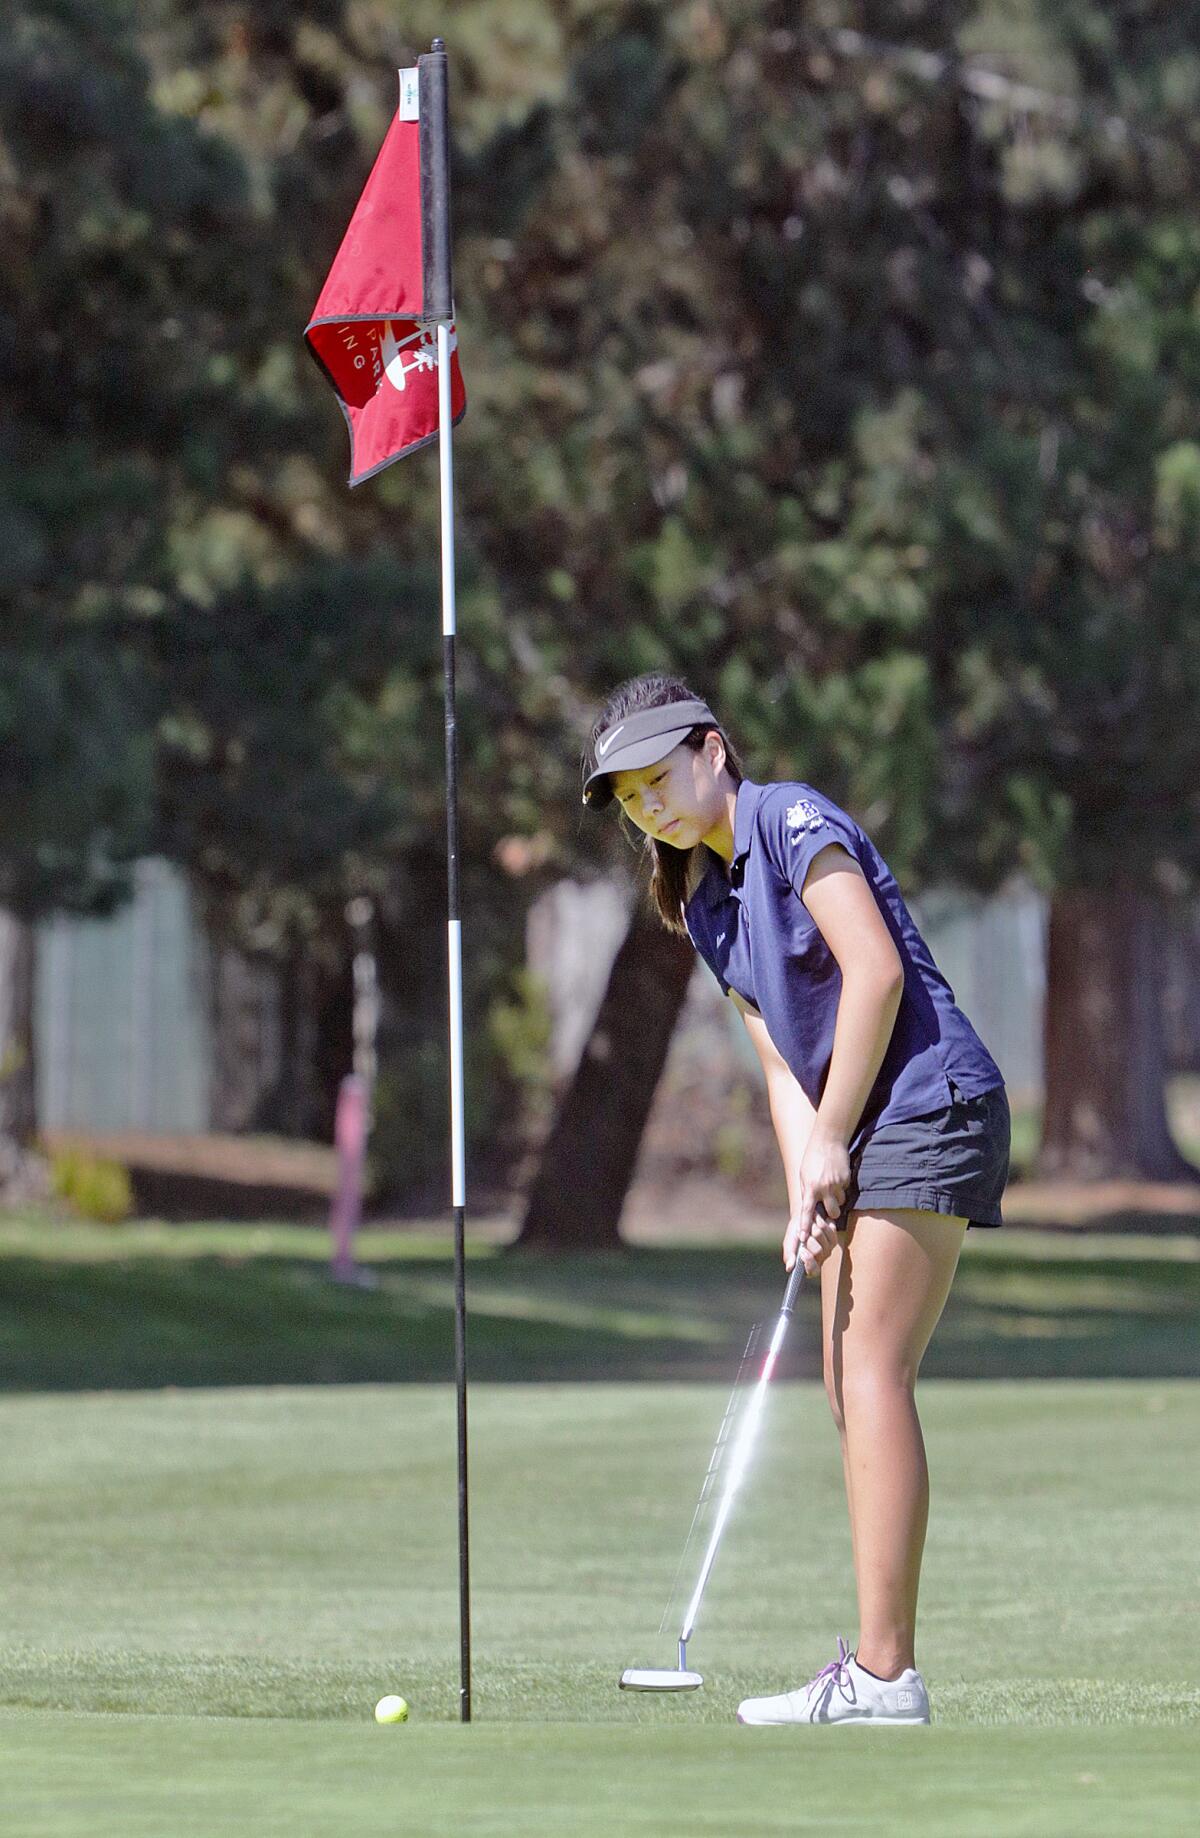 Burbank's Kara Lee putts on the third green in a Pacific League girls' golf match at Harding Golf Course in Los Angeles on Tuesday, September 24, 2019.